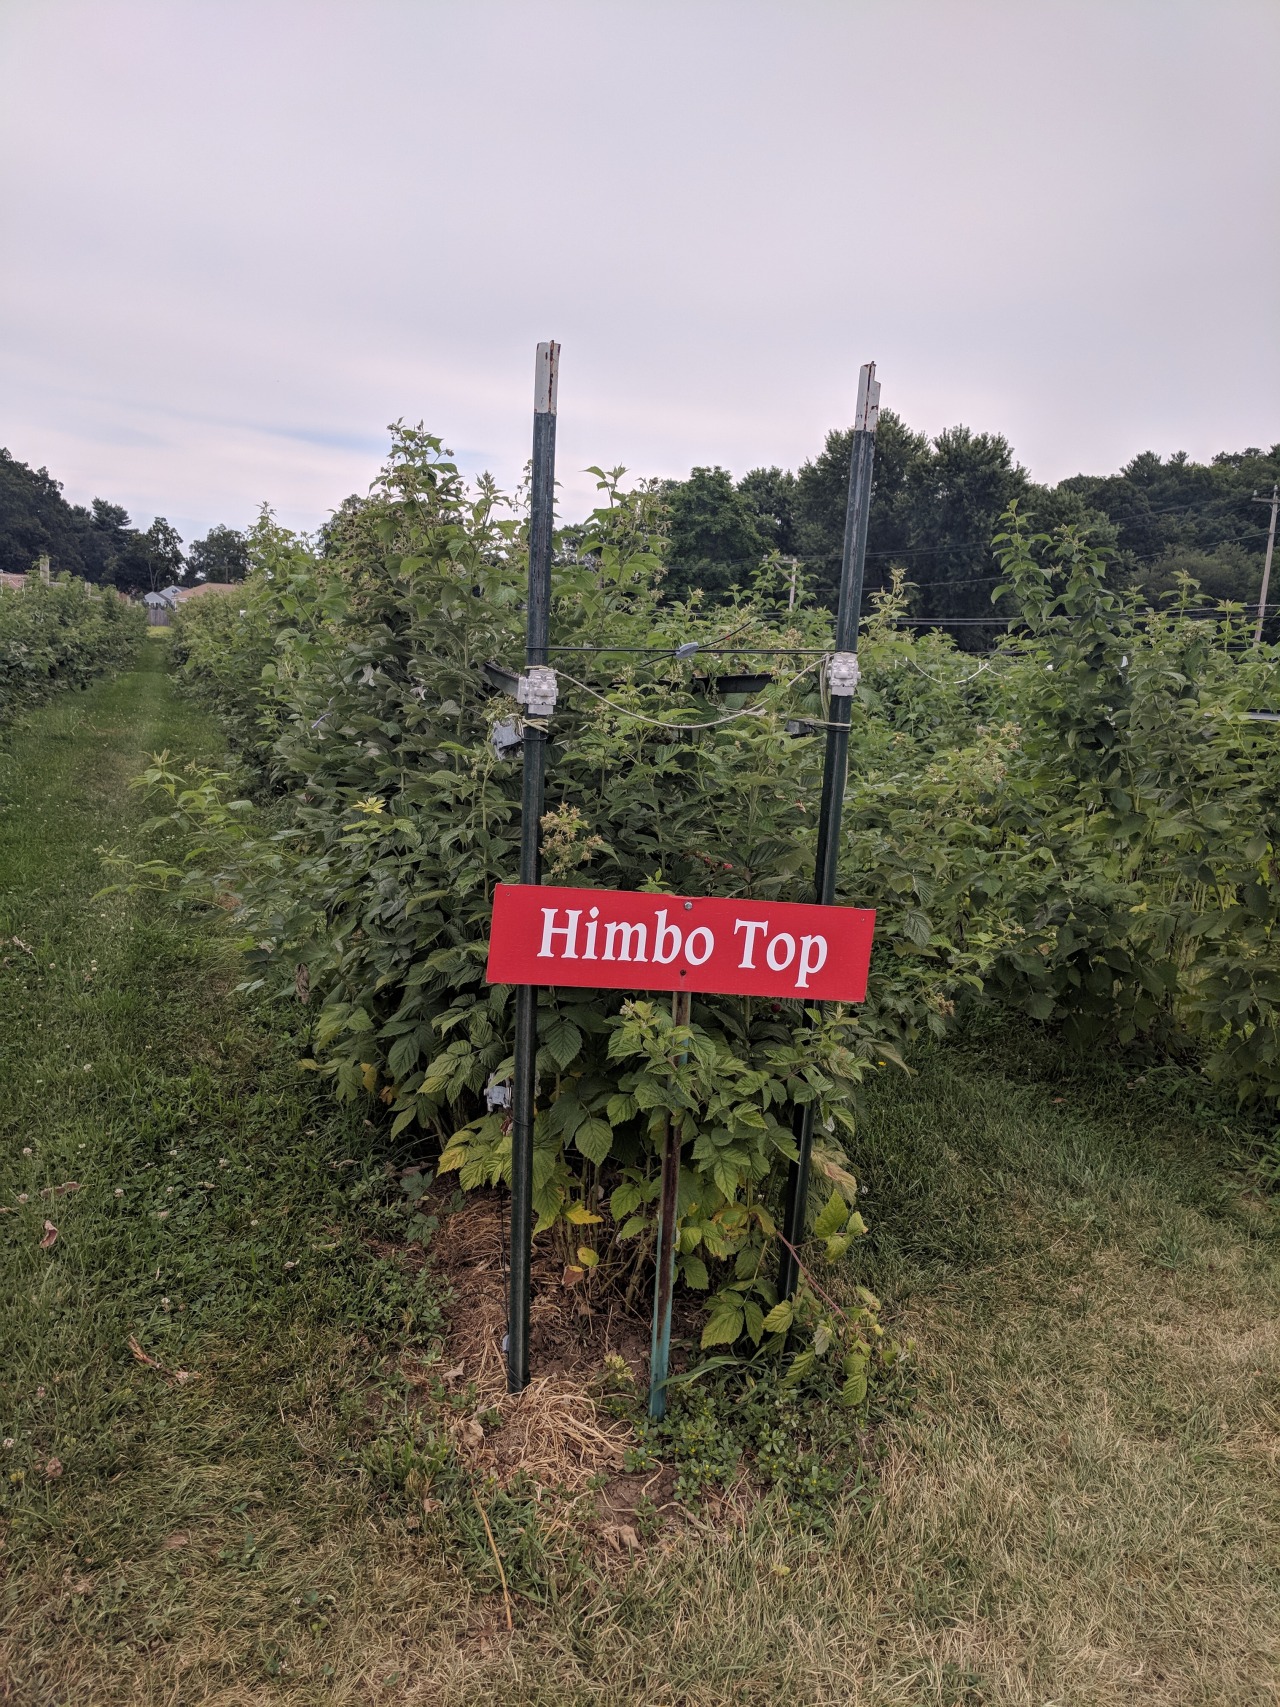 maid-of-timey-wimey:secondbeatsongs:youngalientype:youngalientype:I’m out picking my own raspberries and… Everyone please look at this I am fucking crying alone in a field of raspberriesALTALTALTALTI might need to reconsider my gardening